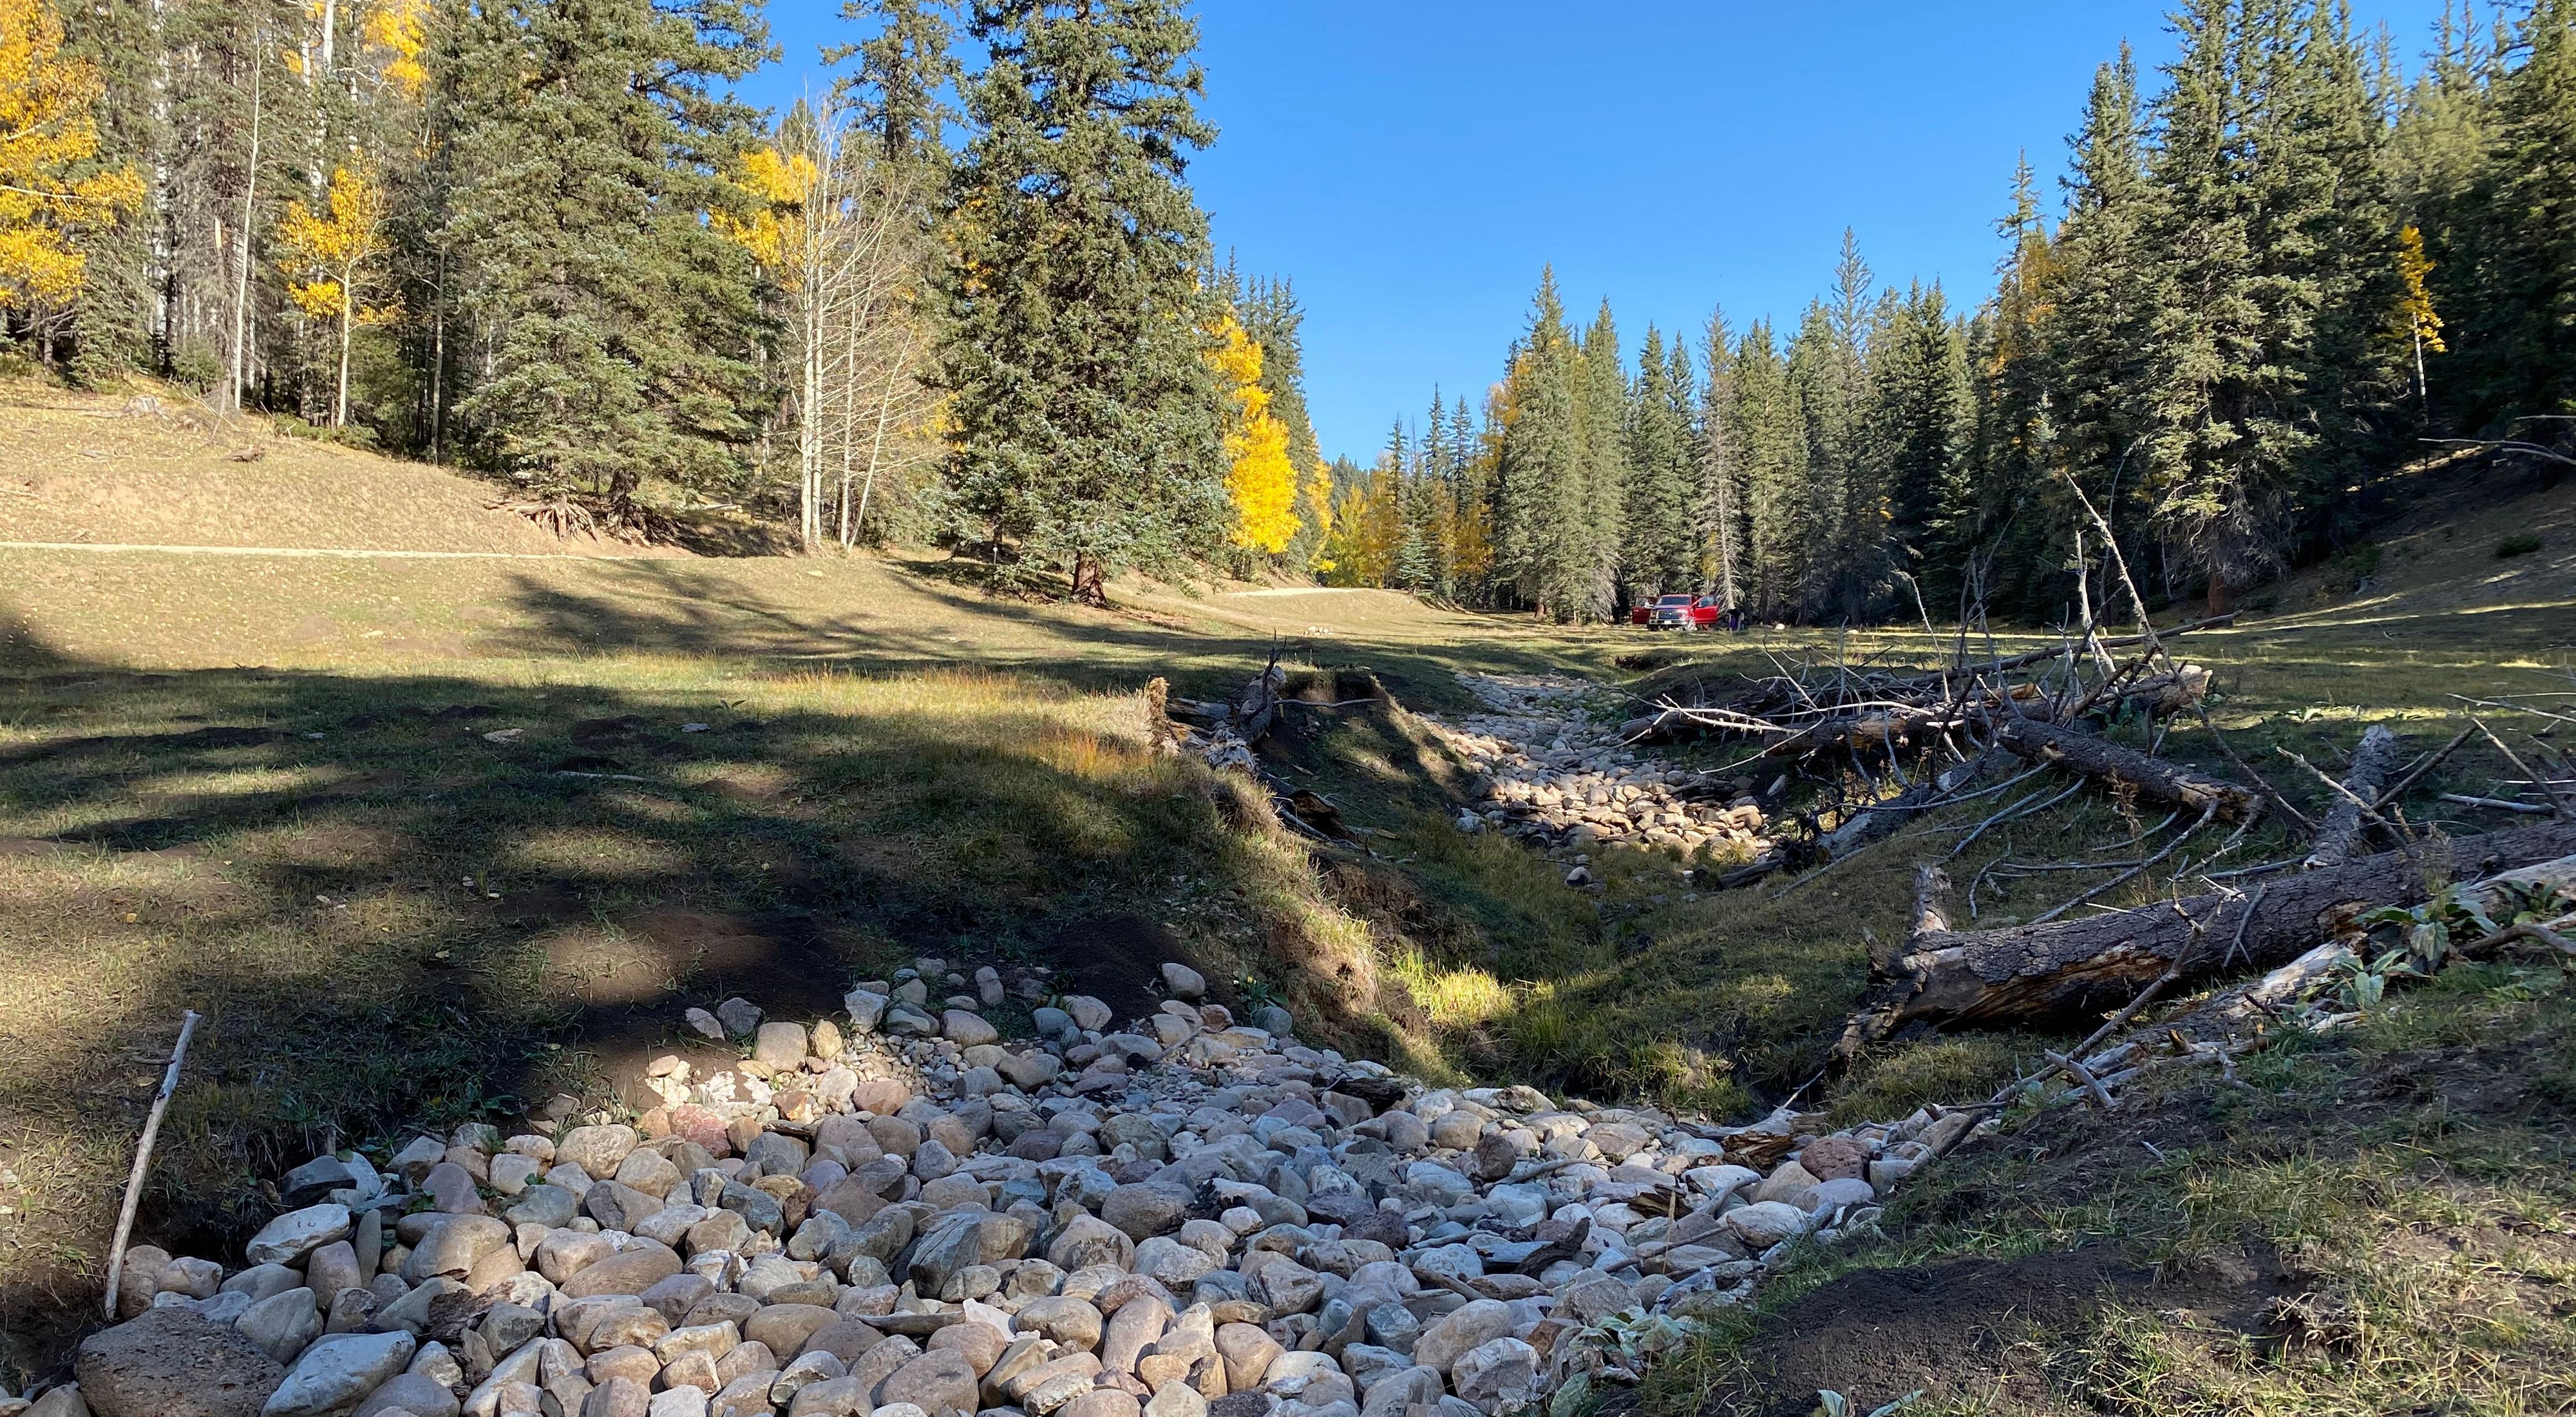 A rehabilitated stream surround by pine trees in La Jara Wetlands, New Mexico.